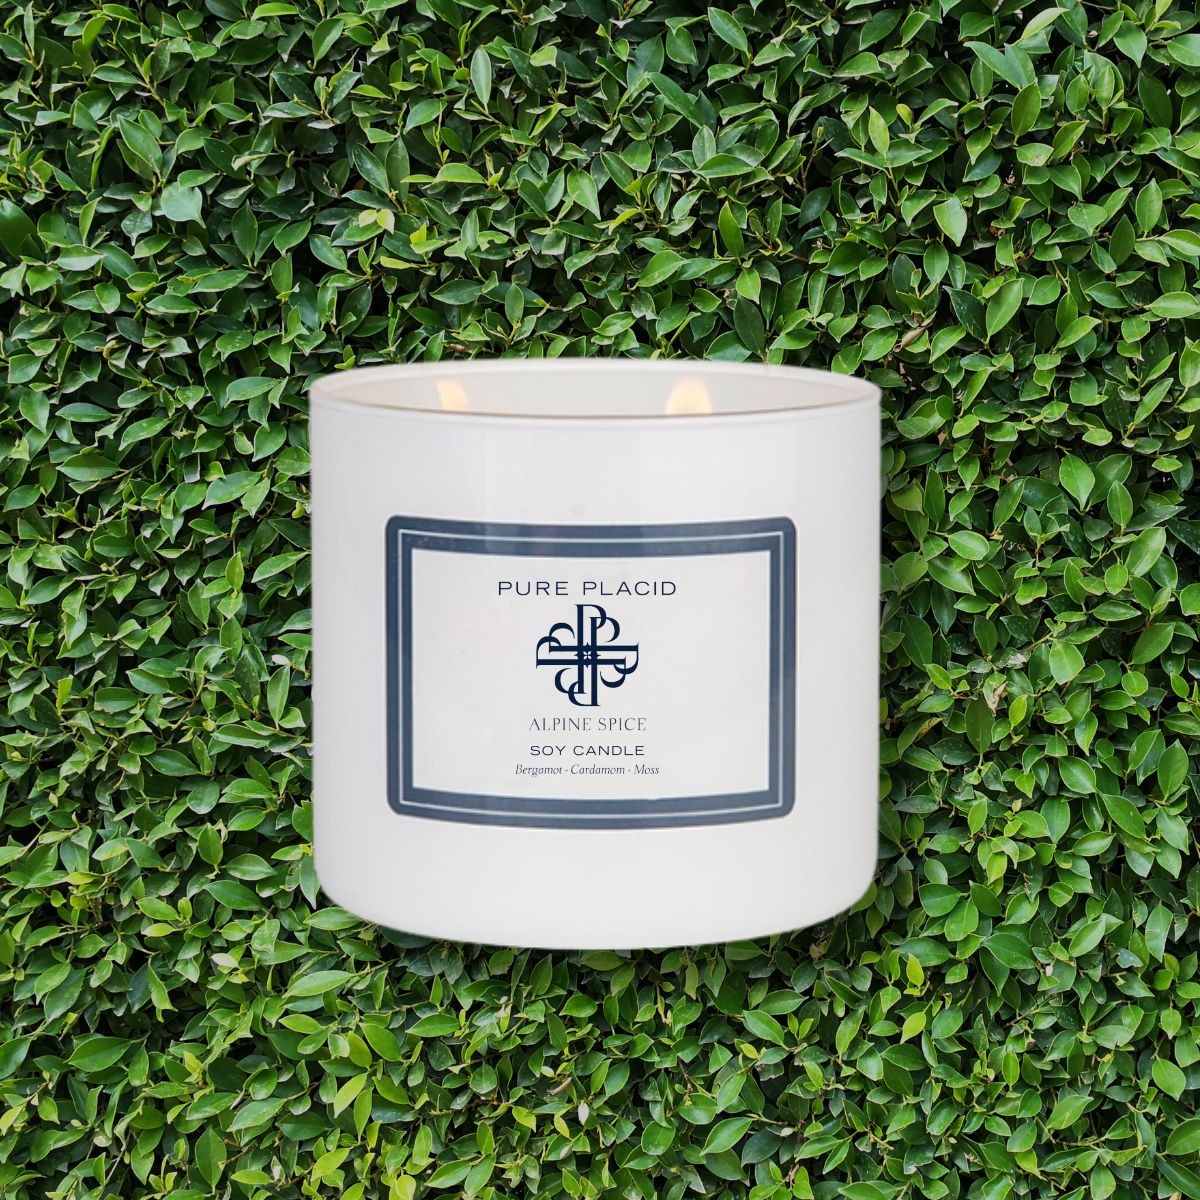 Alpine Spice Soy Candle